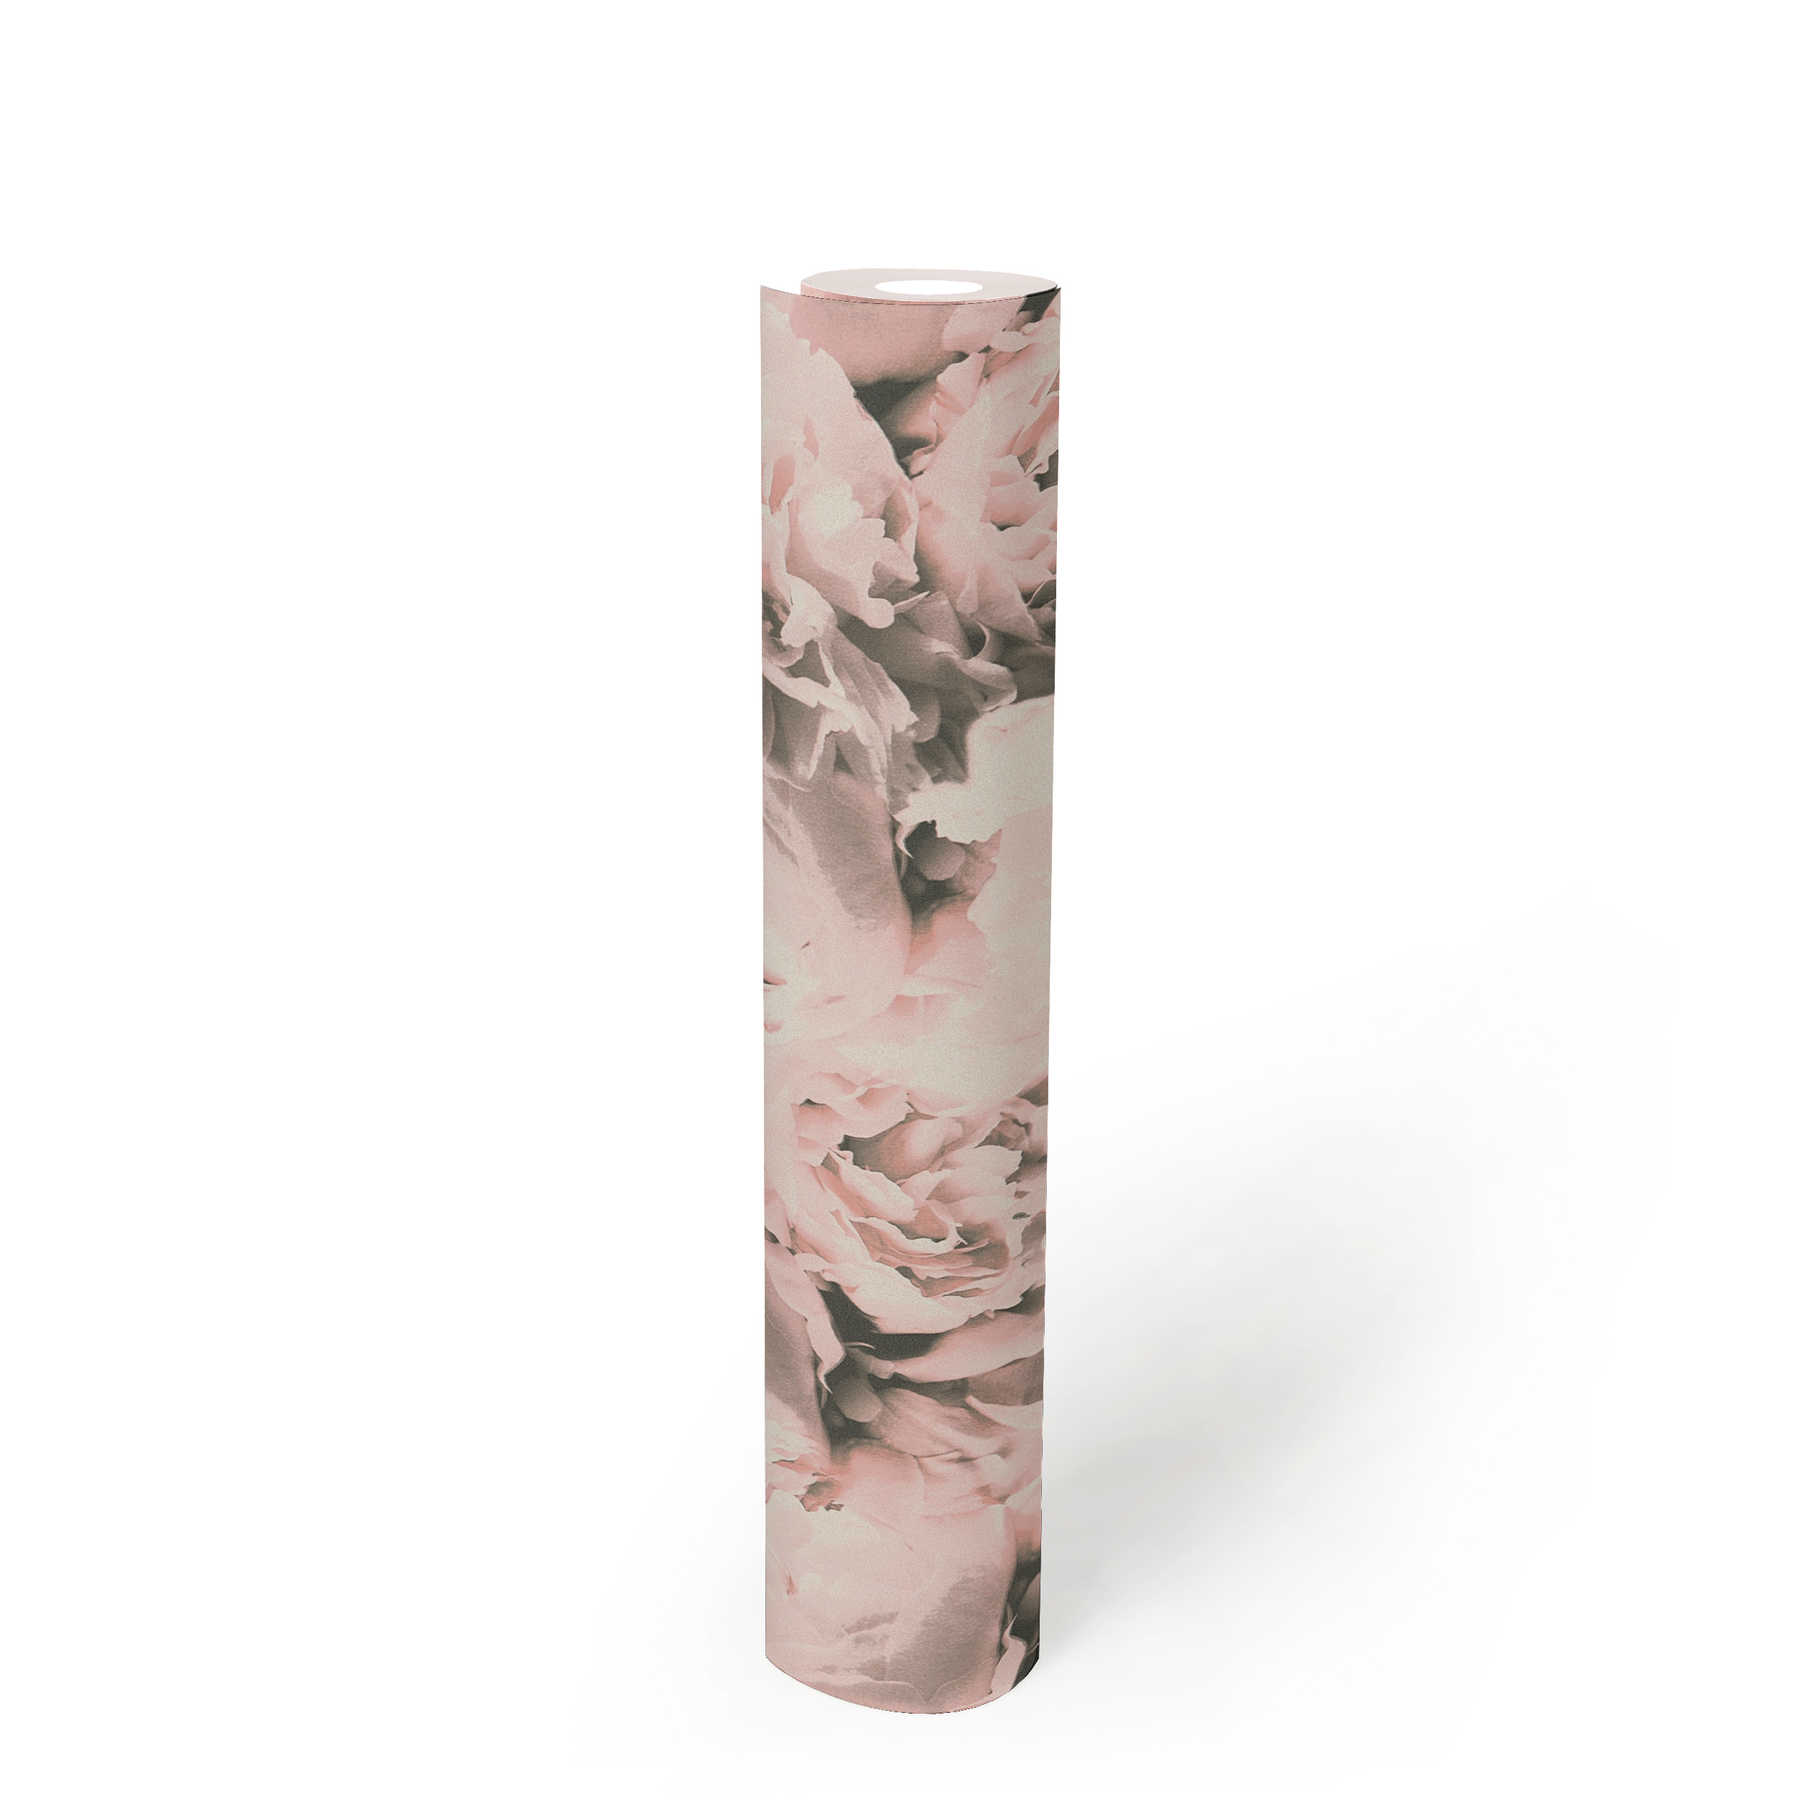             Floral wallpaper roses with shimmer effect - pink, cream
        